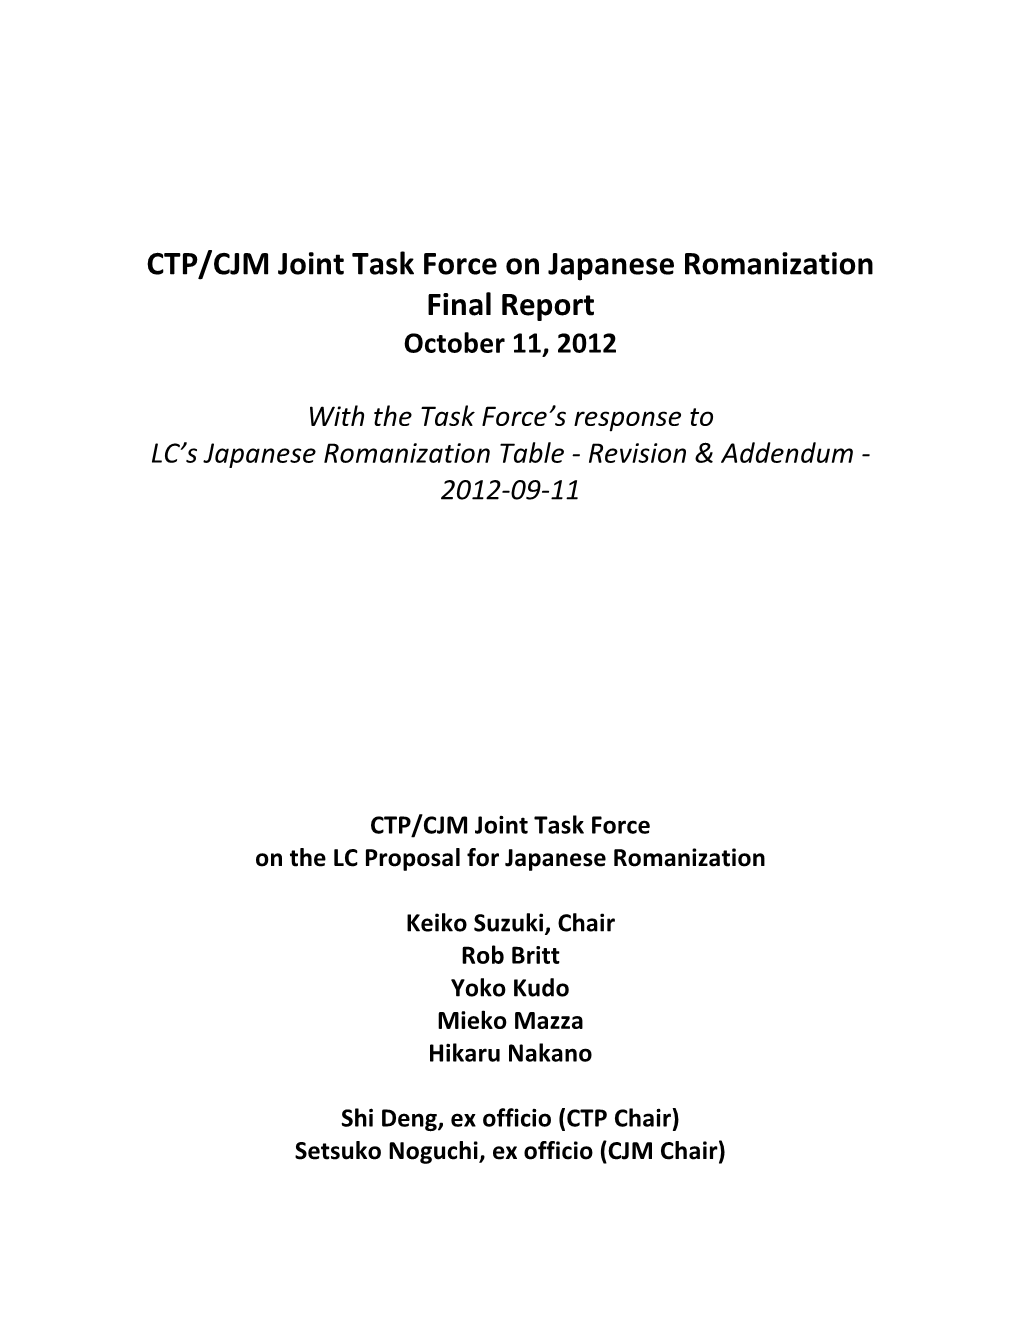 CTP/CJM Joint Task Force on Japanese Romanization Final Report October 11, 2012